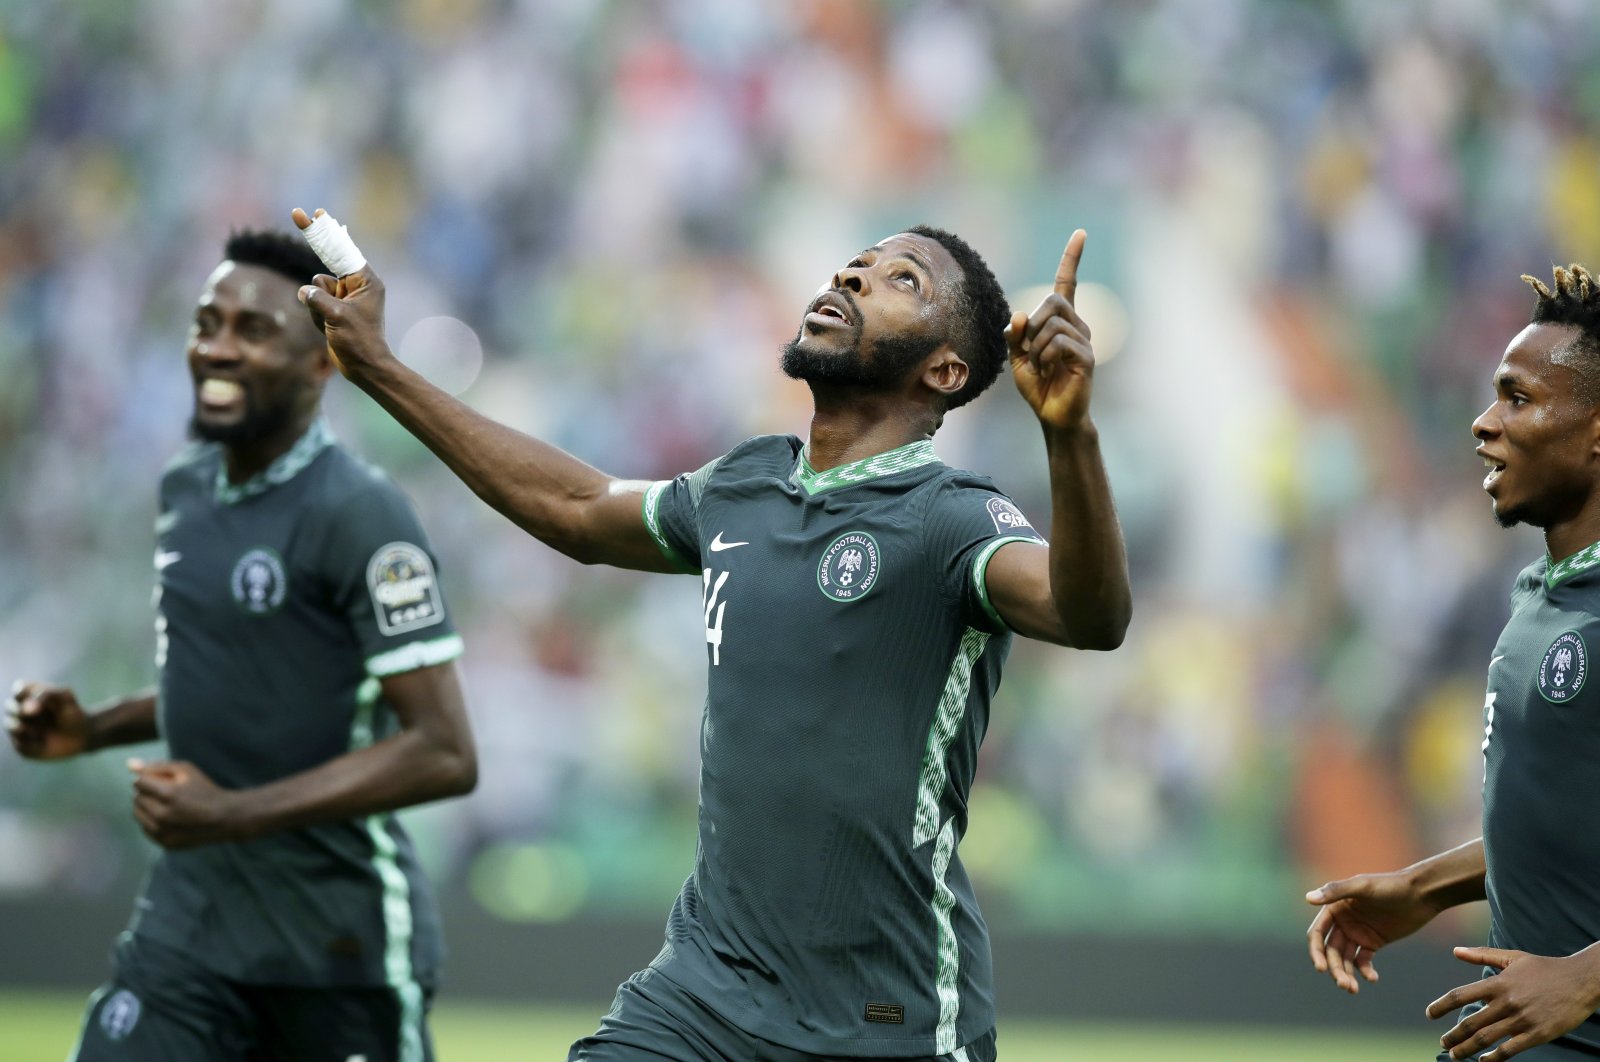 Nigeria&#039;s Iheanacho Kelechi (C) celebrates after scoring in a 2021 Africa Cup of Nations match against Egypt, Garoua, Cameroon, Jan. 11, 2022. (EPA Photo)